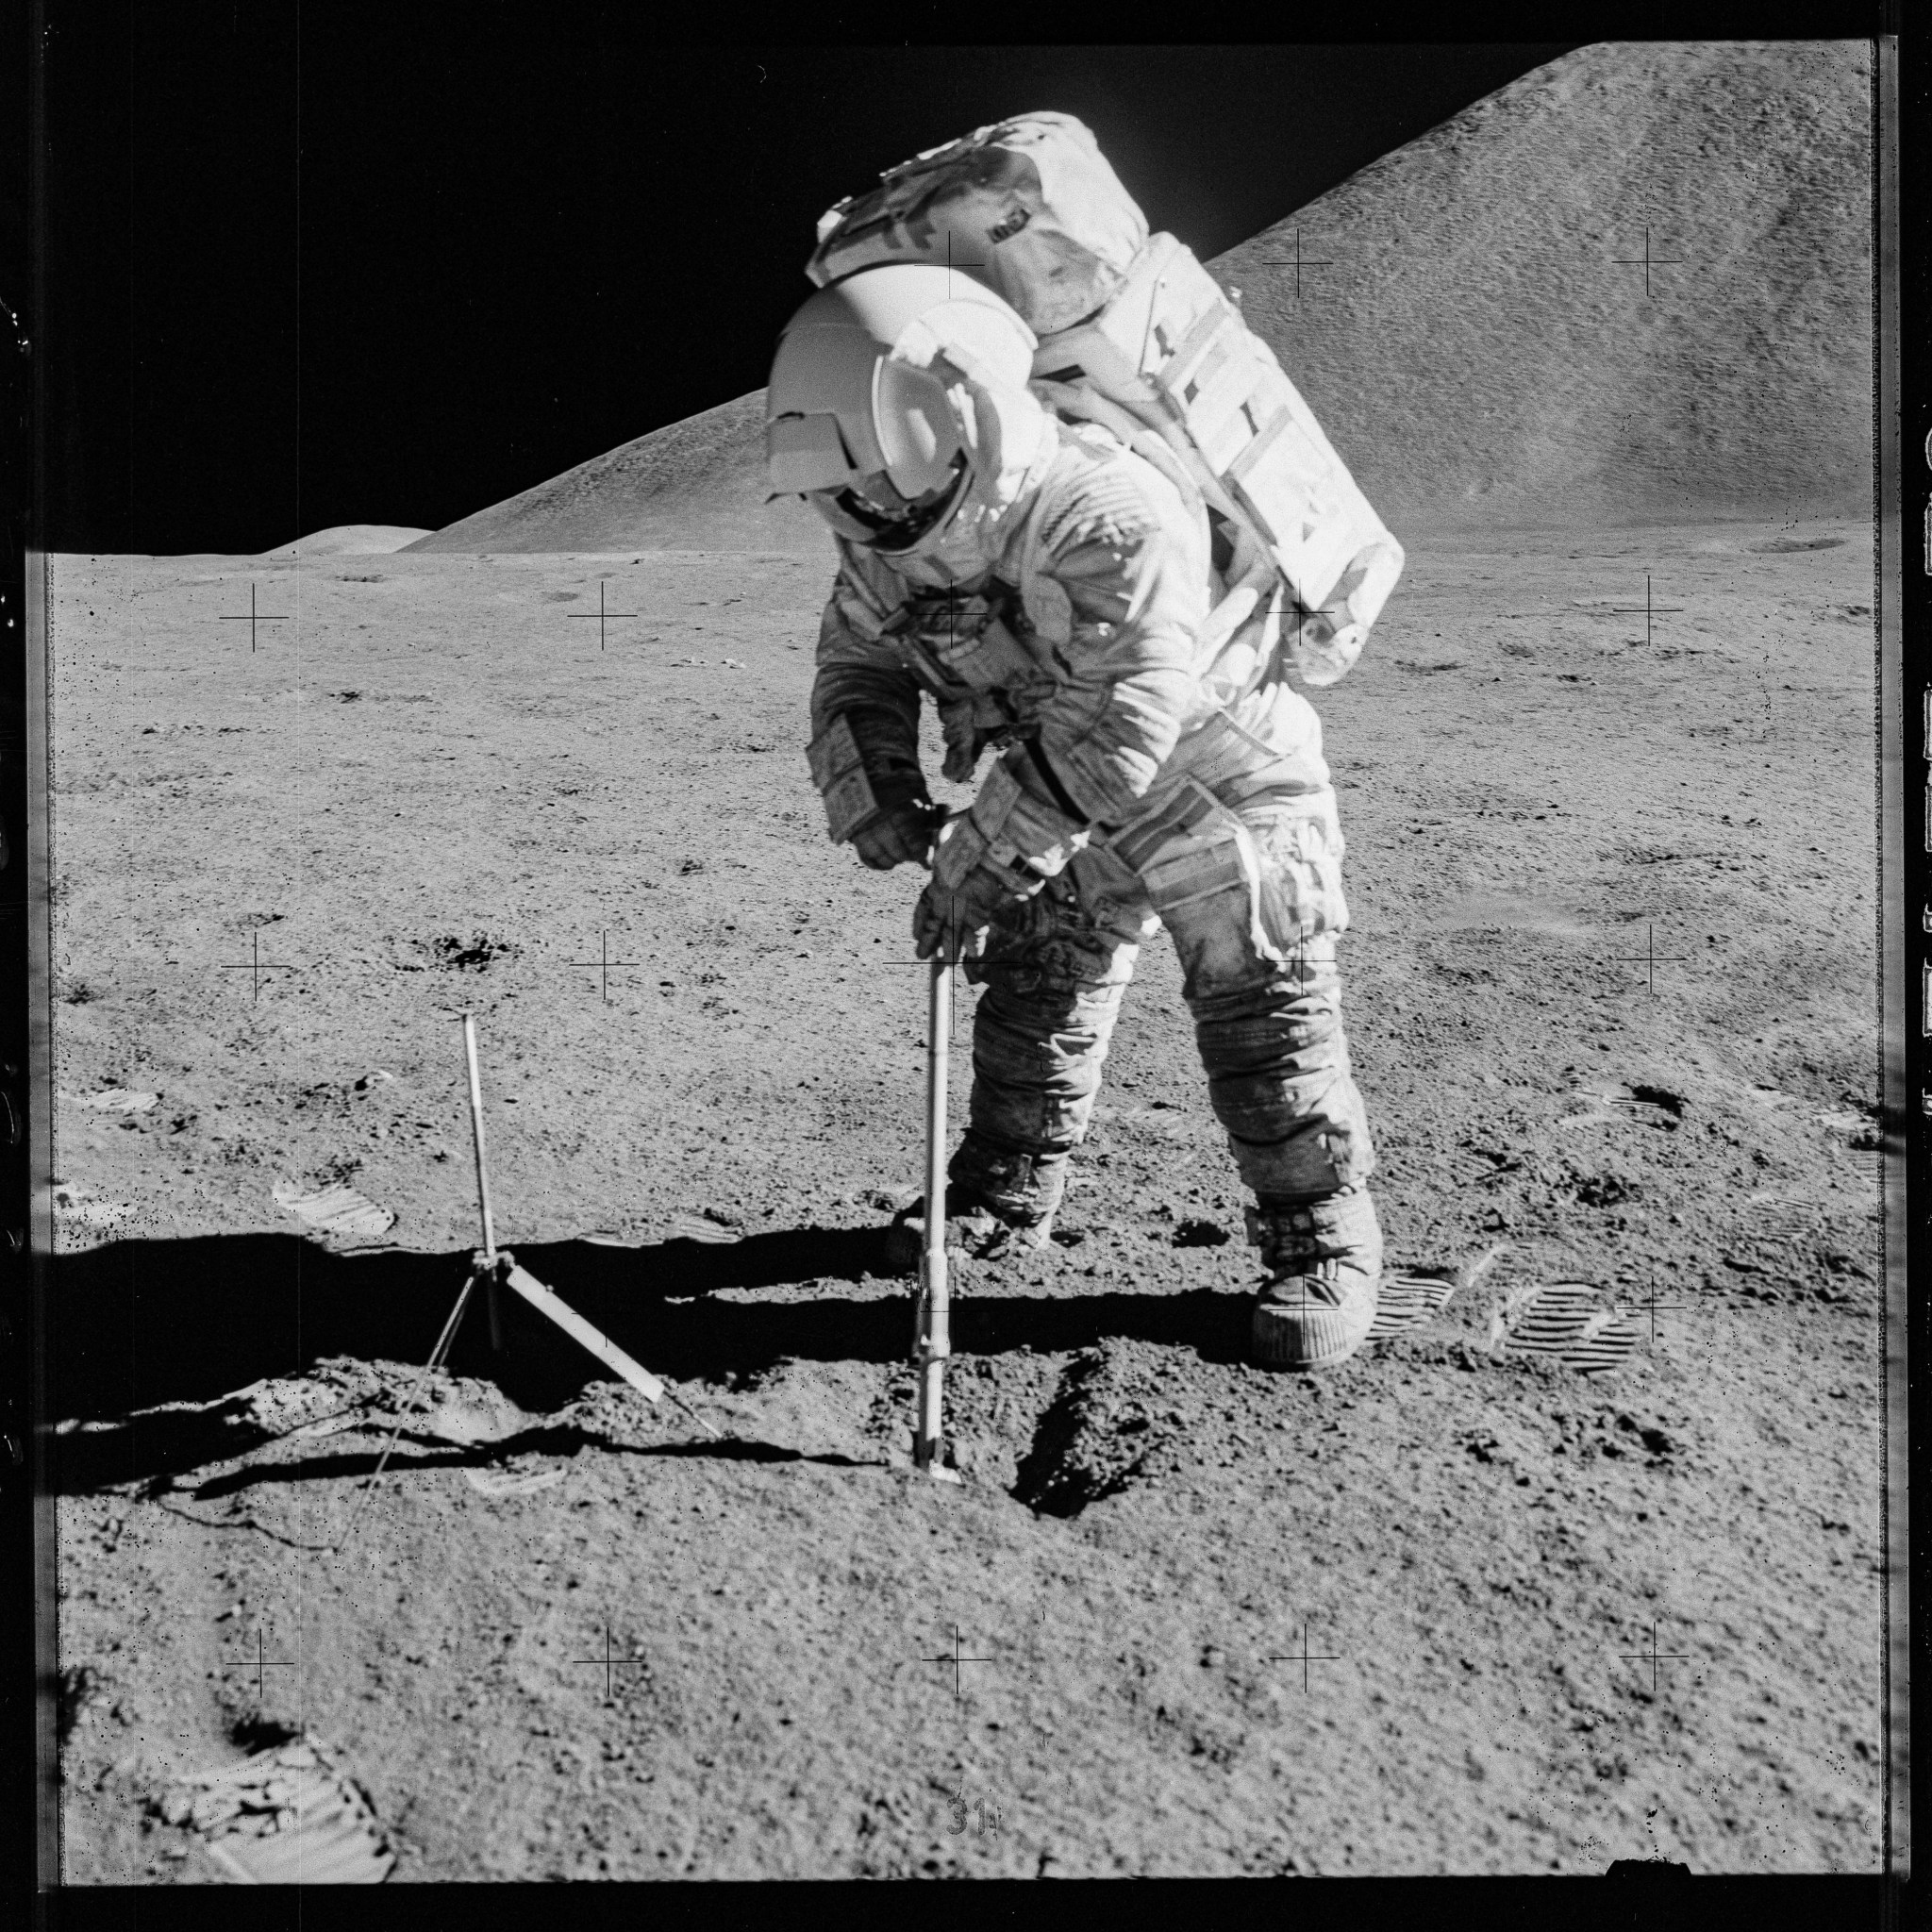 Black and white photo of astronaut spacesuit covered in moon dust